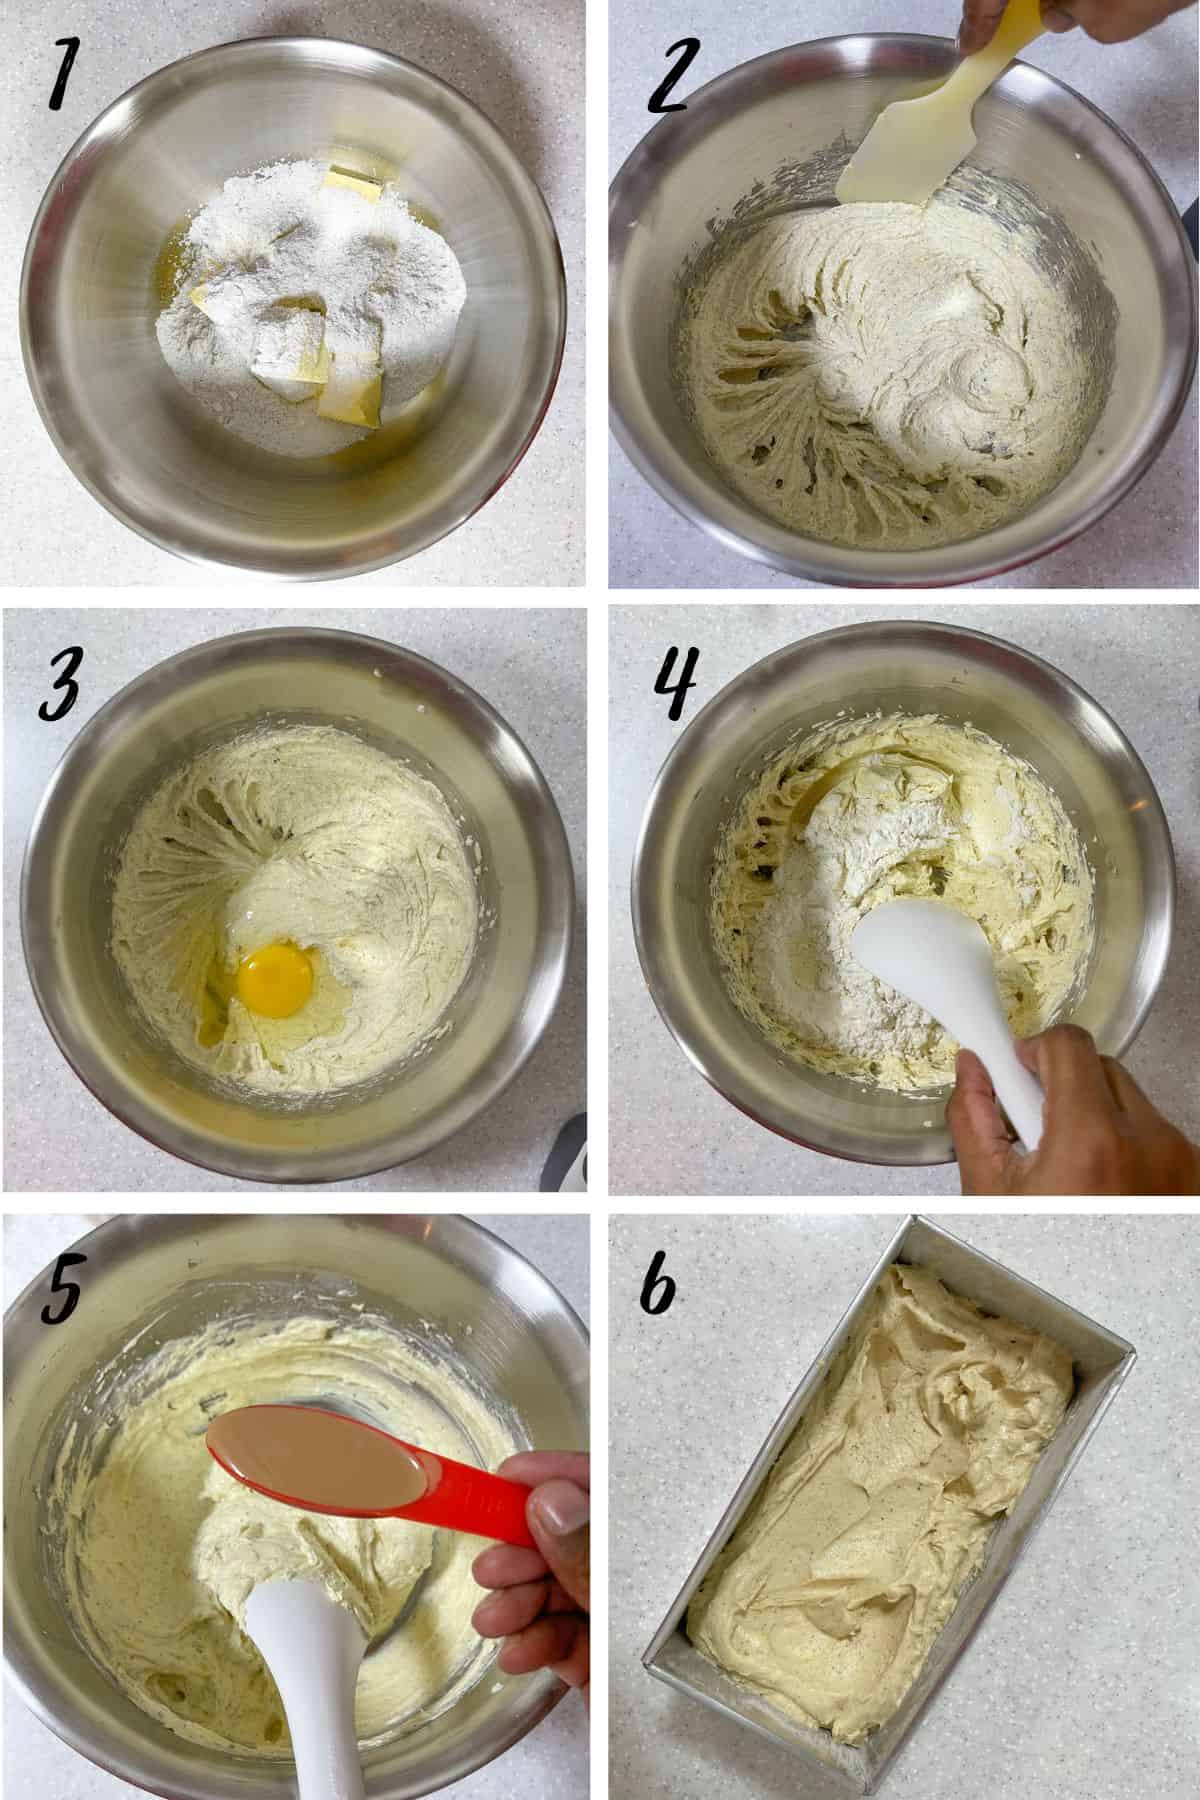 A poster of 6 images showing how to mix cake batter.